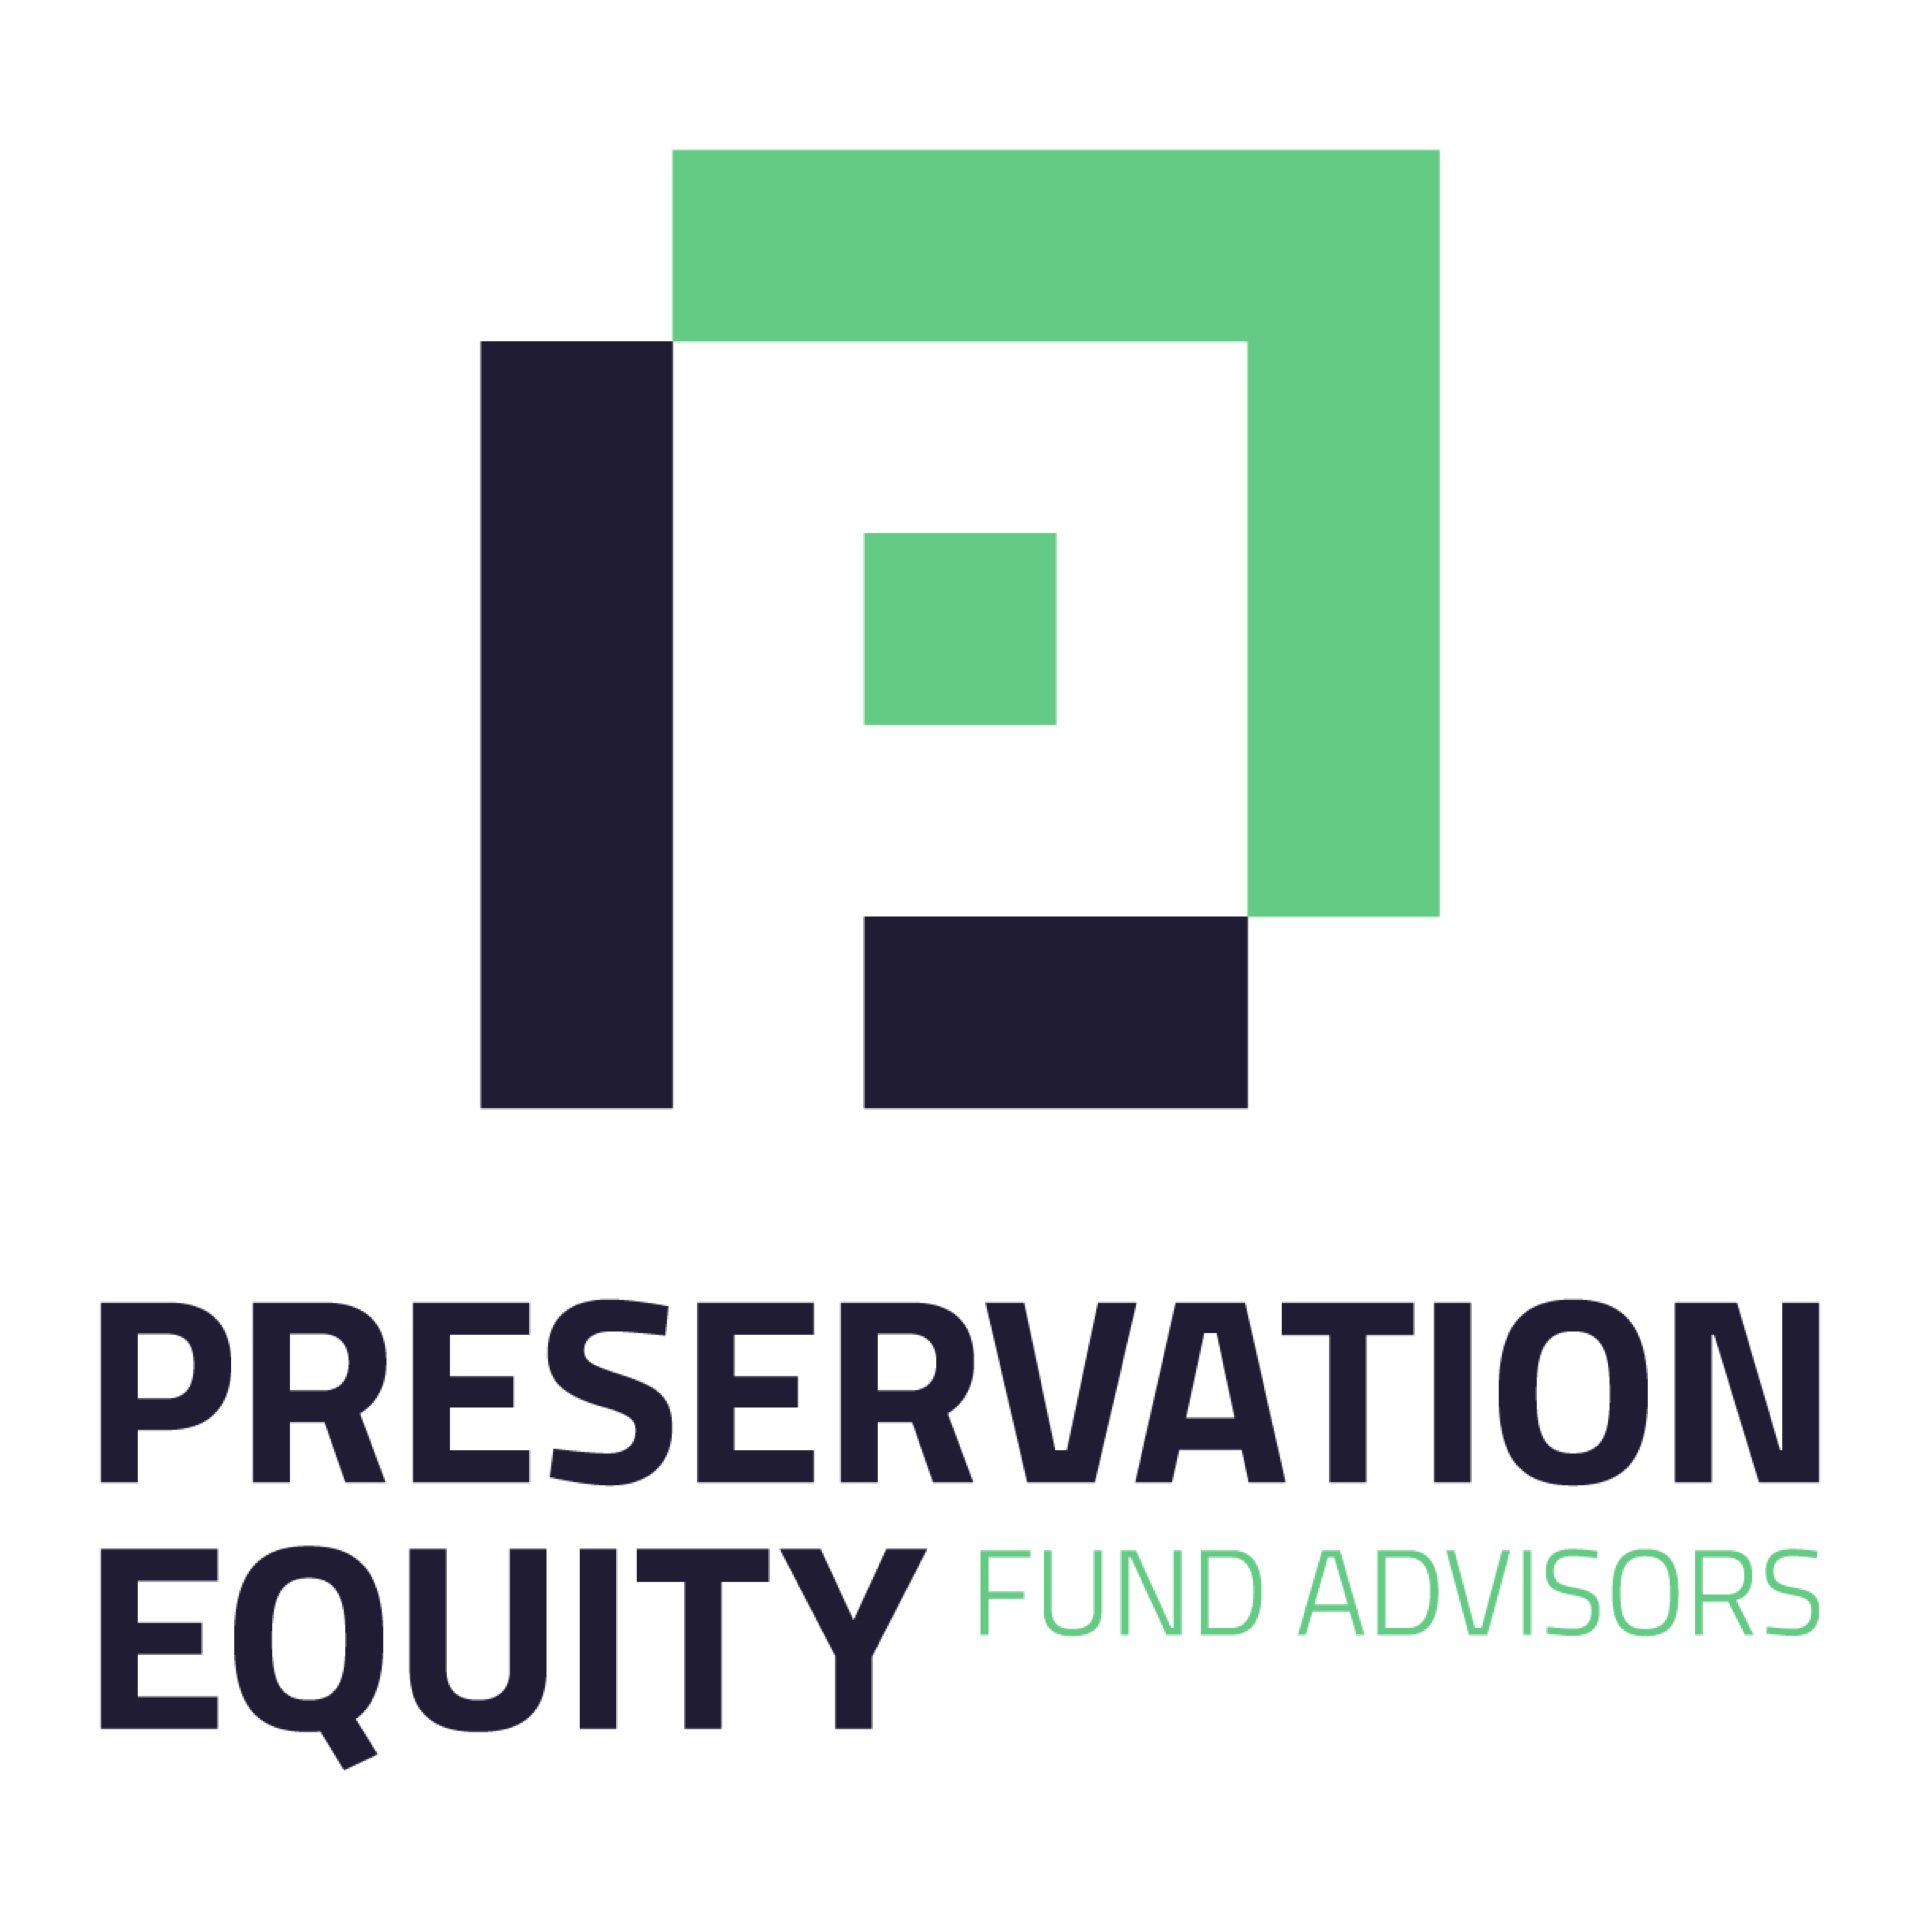 Preservation Equity Fund Advisors